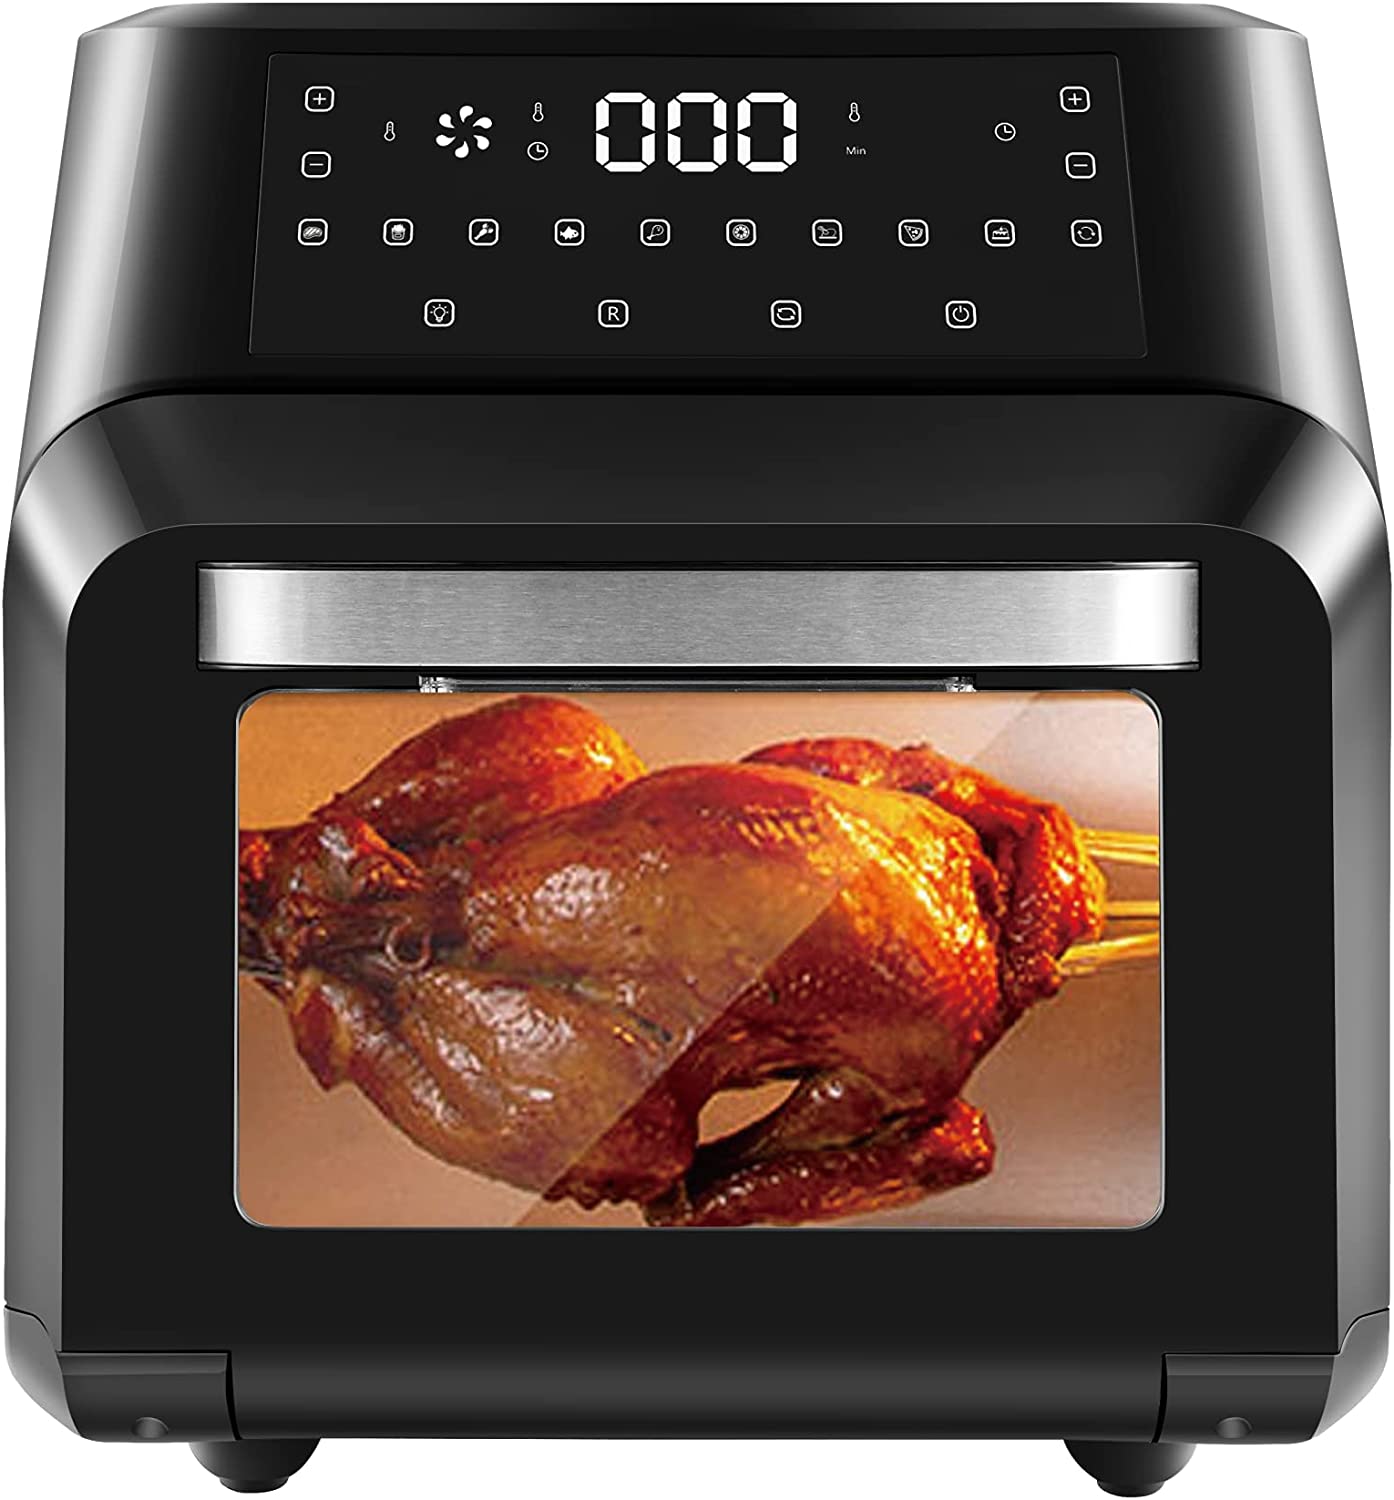 JKM Air Fryer Oven -  - 12 QT Rotisserie Air Fryer Oven 1700W Electric Hot Oven Oilless Cooker with 7 Accessories